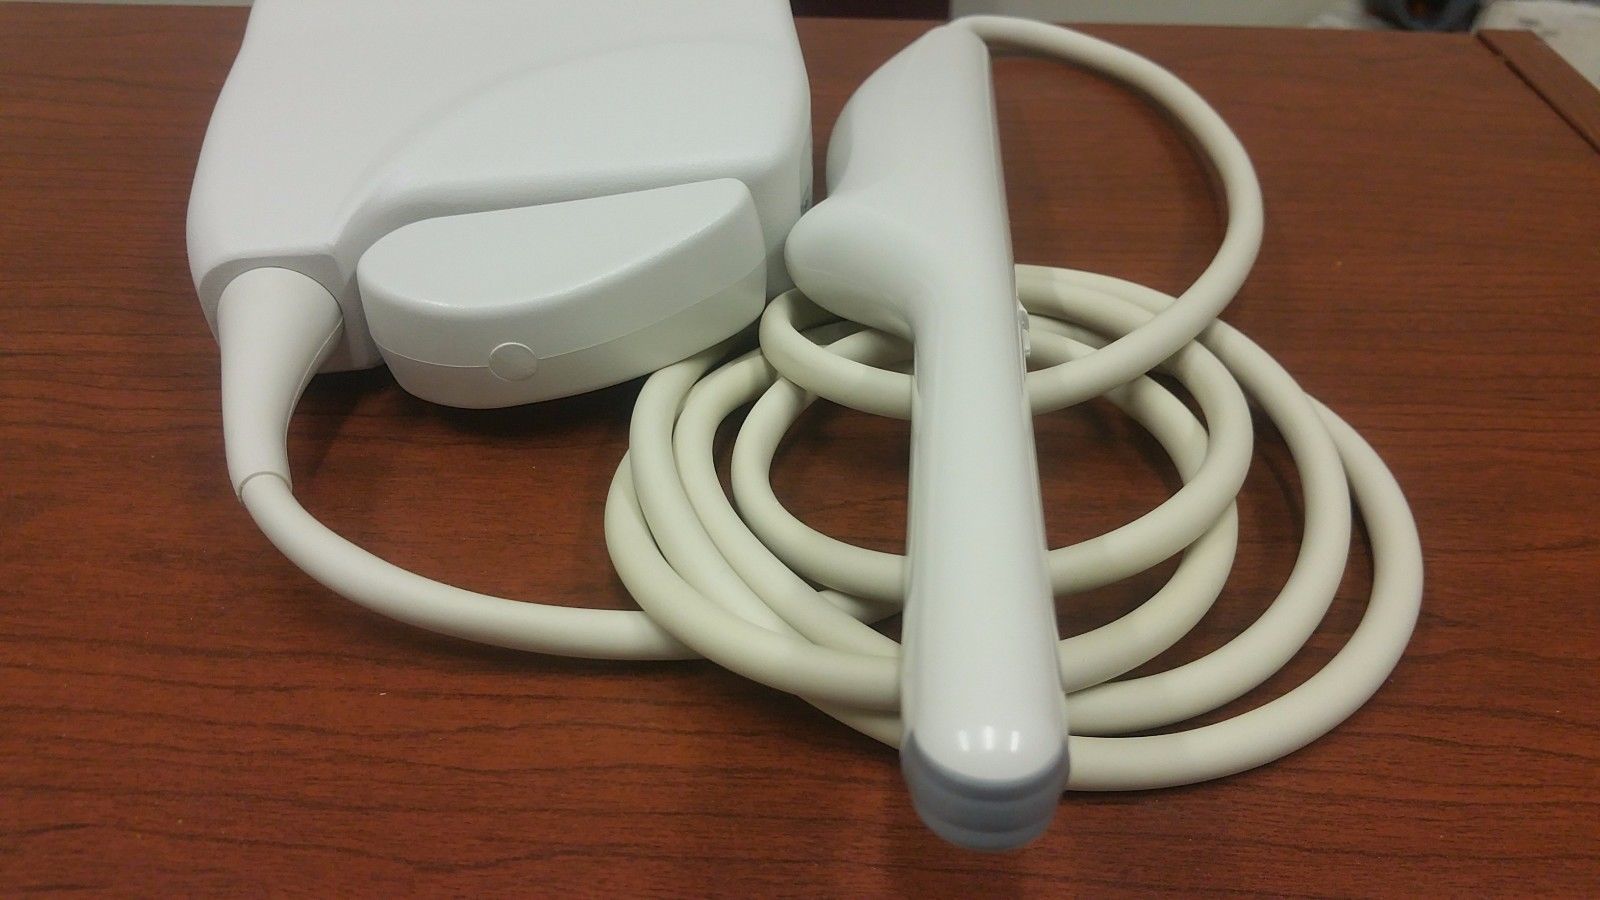 a cord connected to a device on a table